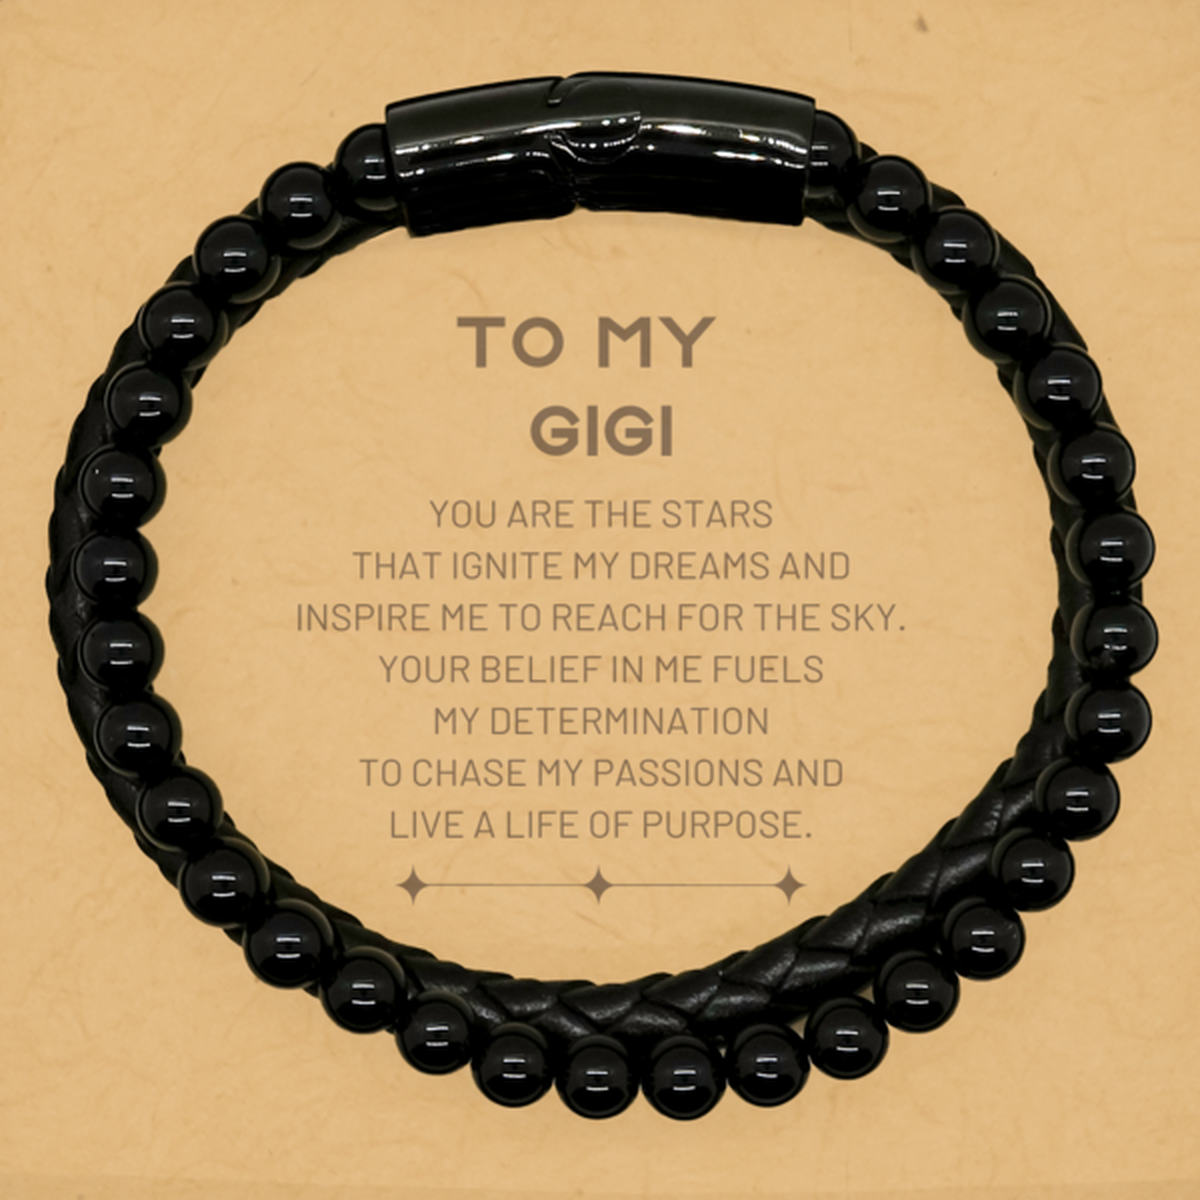 To My Gigi Stone Leather Bracelets, You are the stars that ignite my dreams and inspire me to reach for the sky, Birthday Unique Gifts For Gigi, Thank You Gifts For Gigi